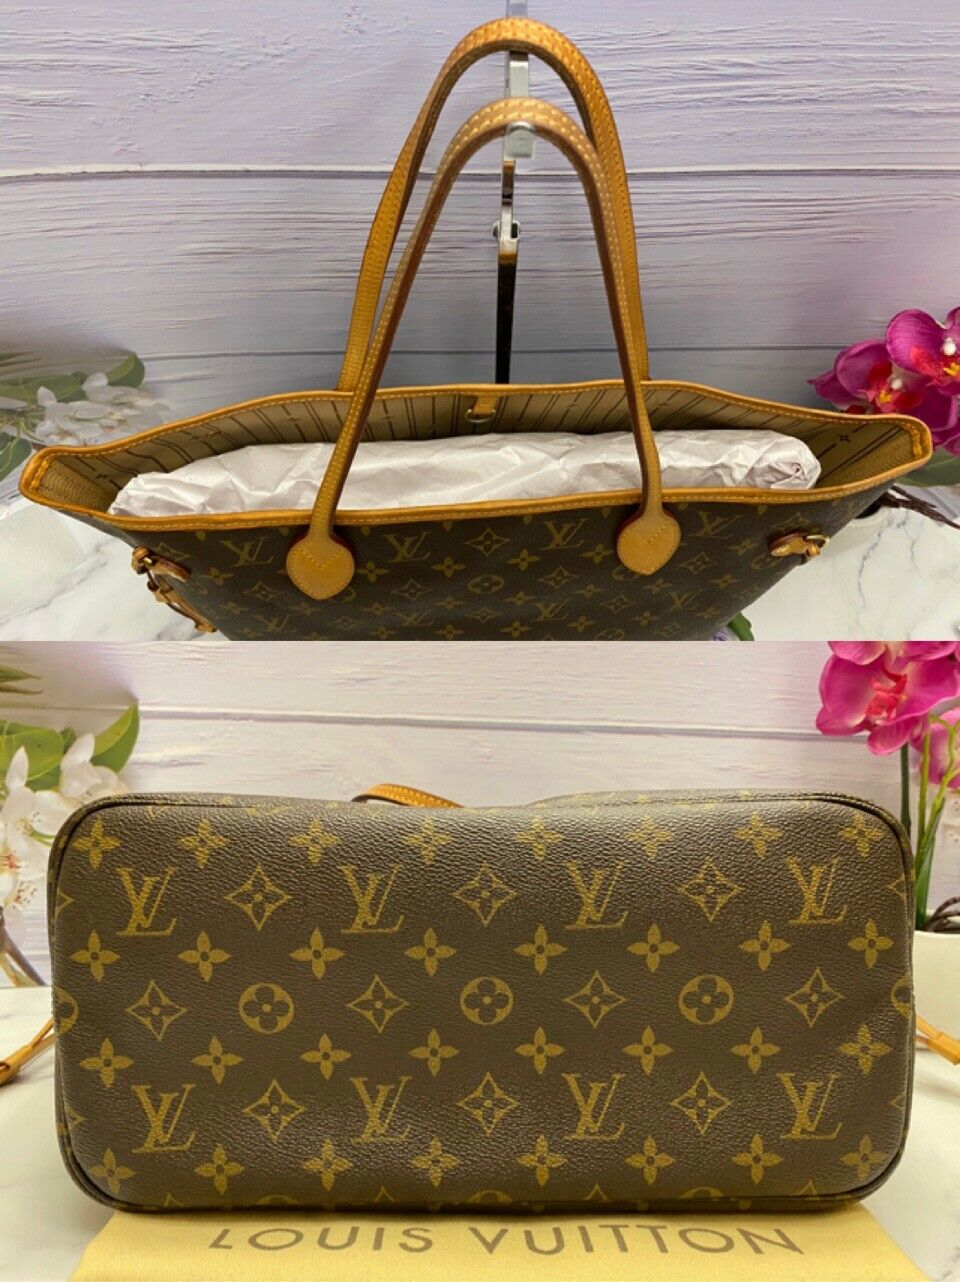 ✨FOR SALE✨ Replica Louis Vuitton neverfull. Super soft leather